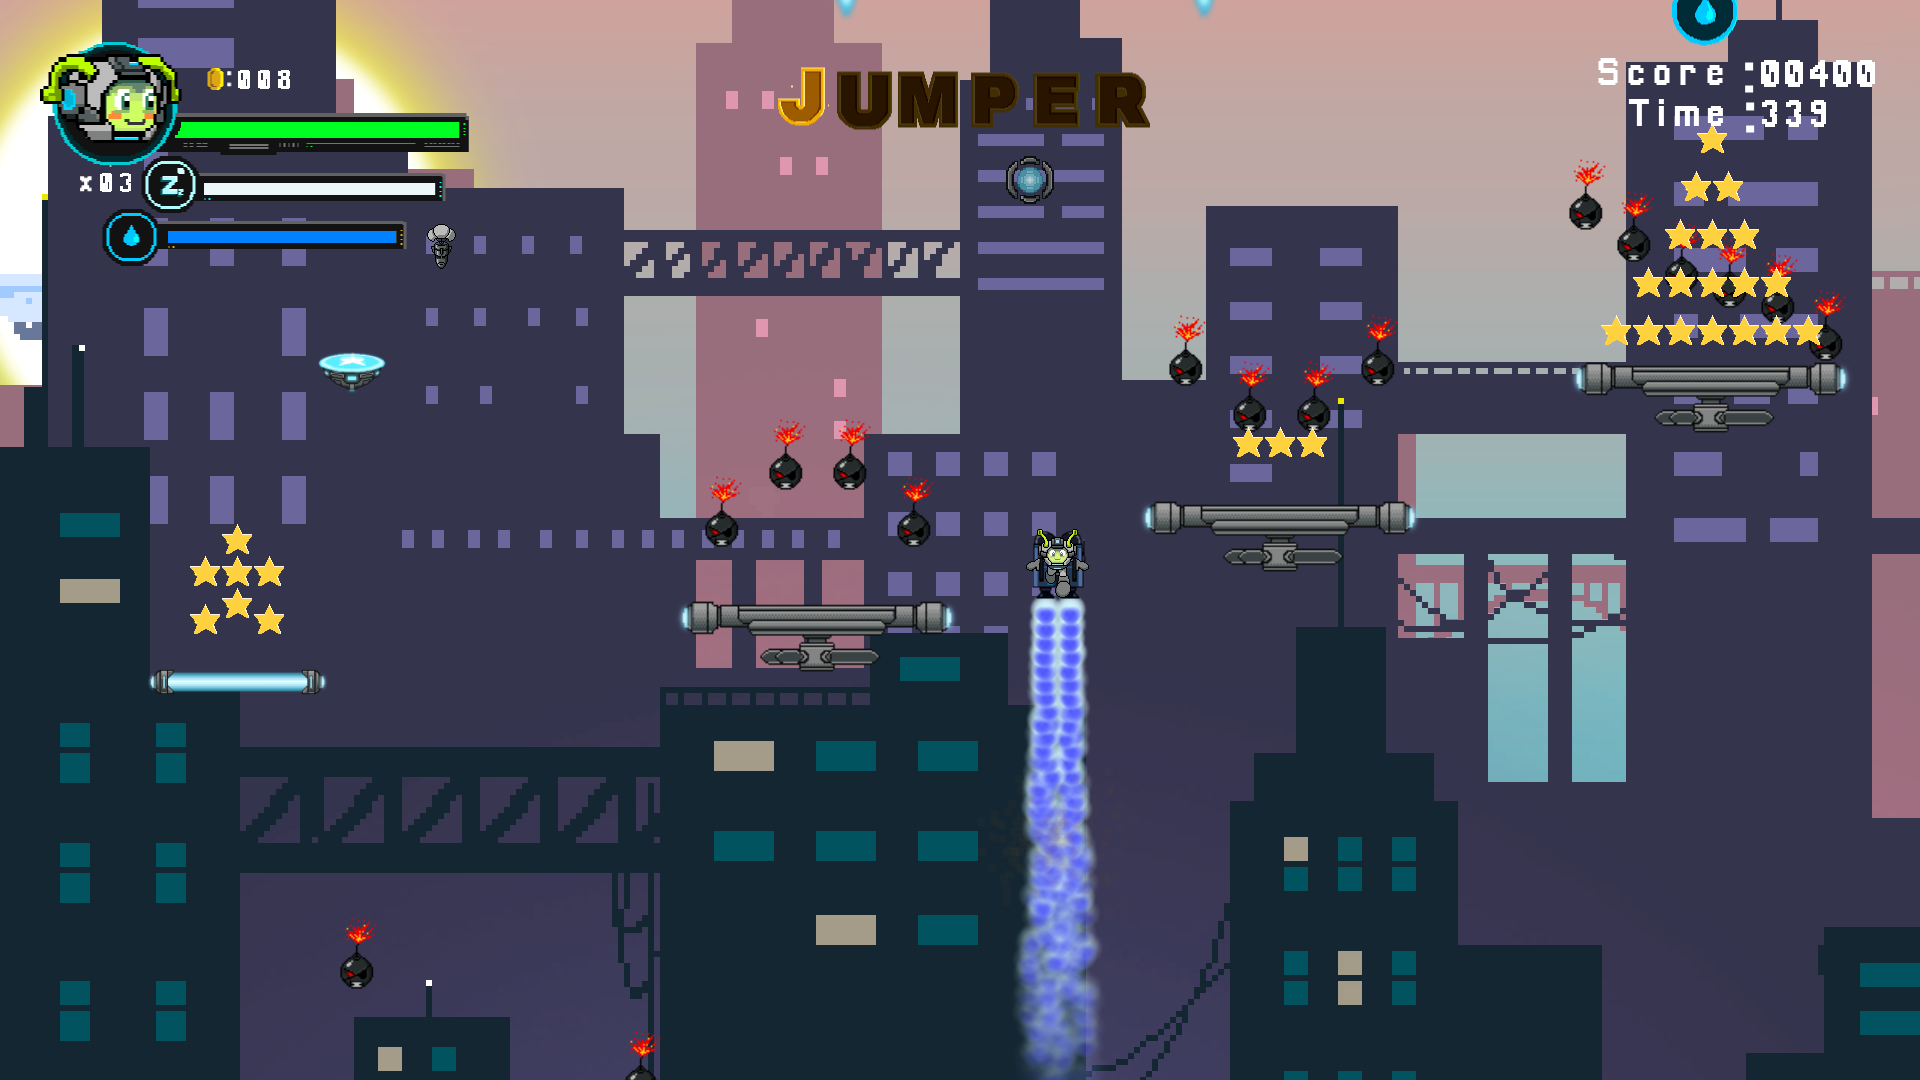 Jumper Starman Scape From the Blue Planet Screenshot